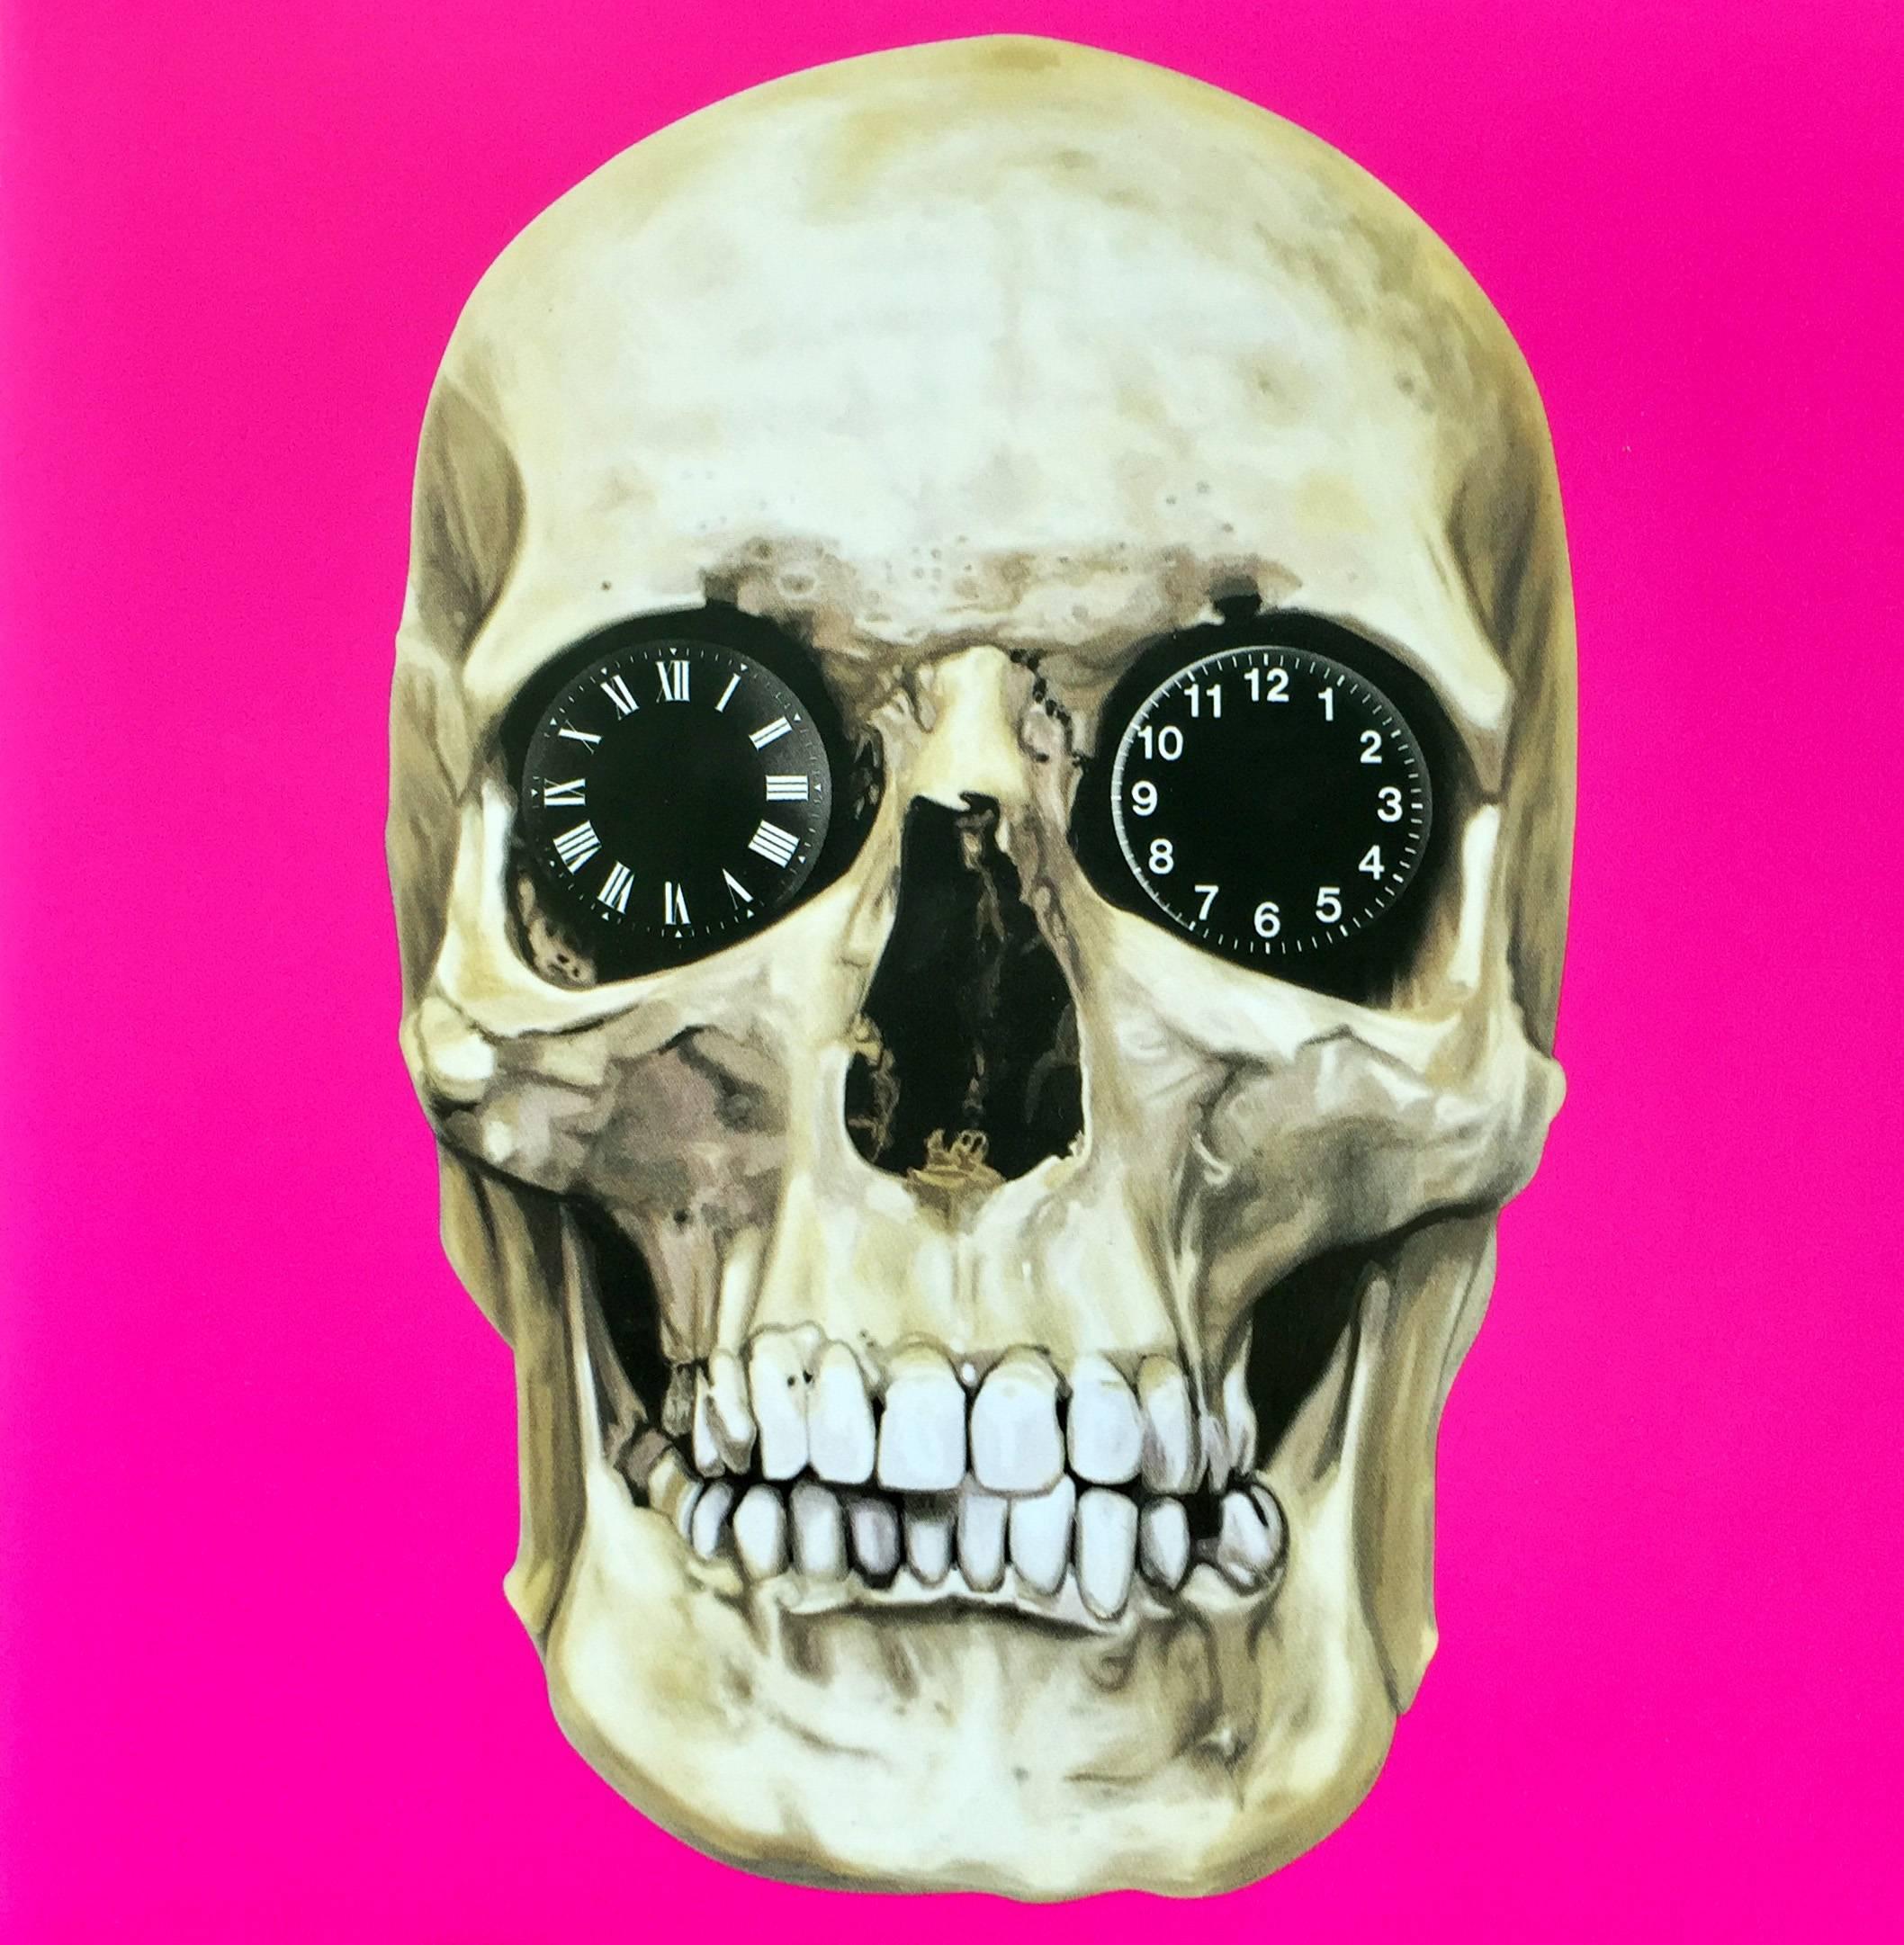 Damien Hirst produced these off-set album cover art exclusively for the heralded UK music group The Hours c.2006

Off-set print on vinyl record jacket
12 x 12 inches (30.48 x 30.48 cm)
Excellent condition for both the cover(s) and record
Looks